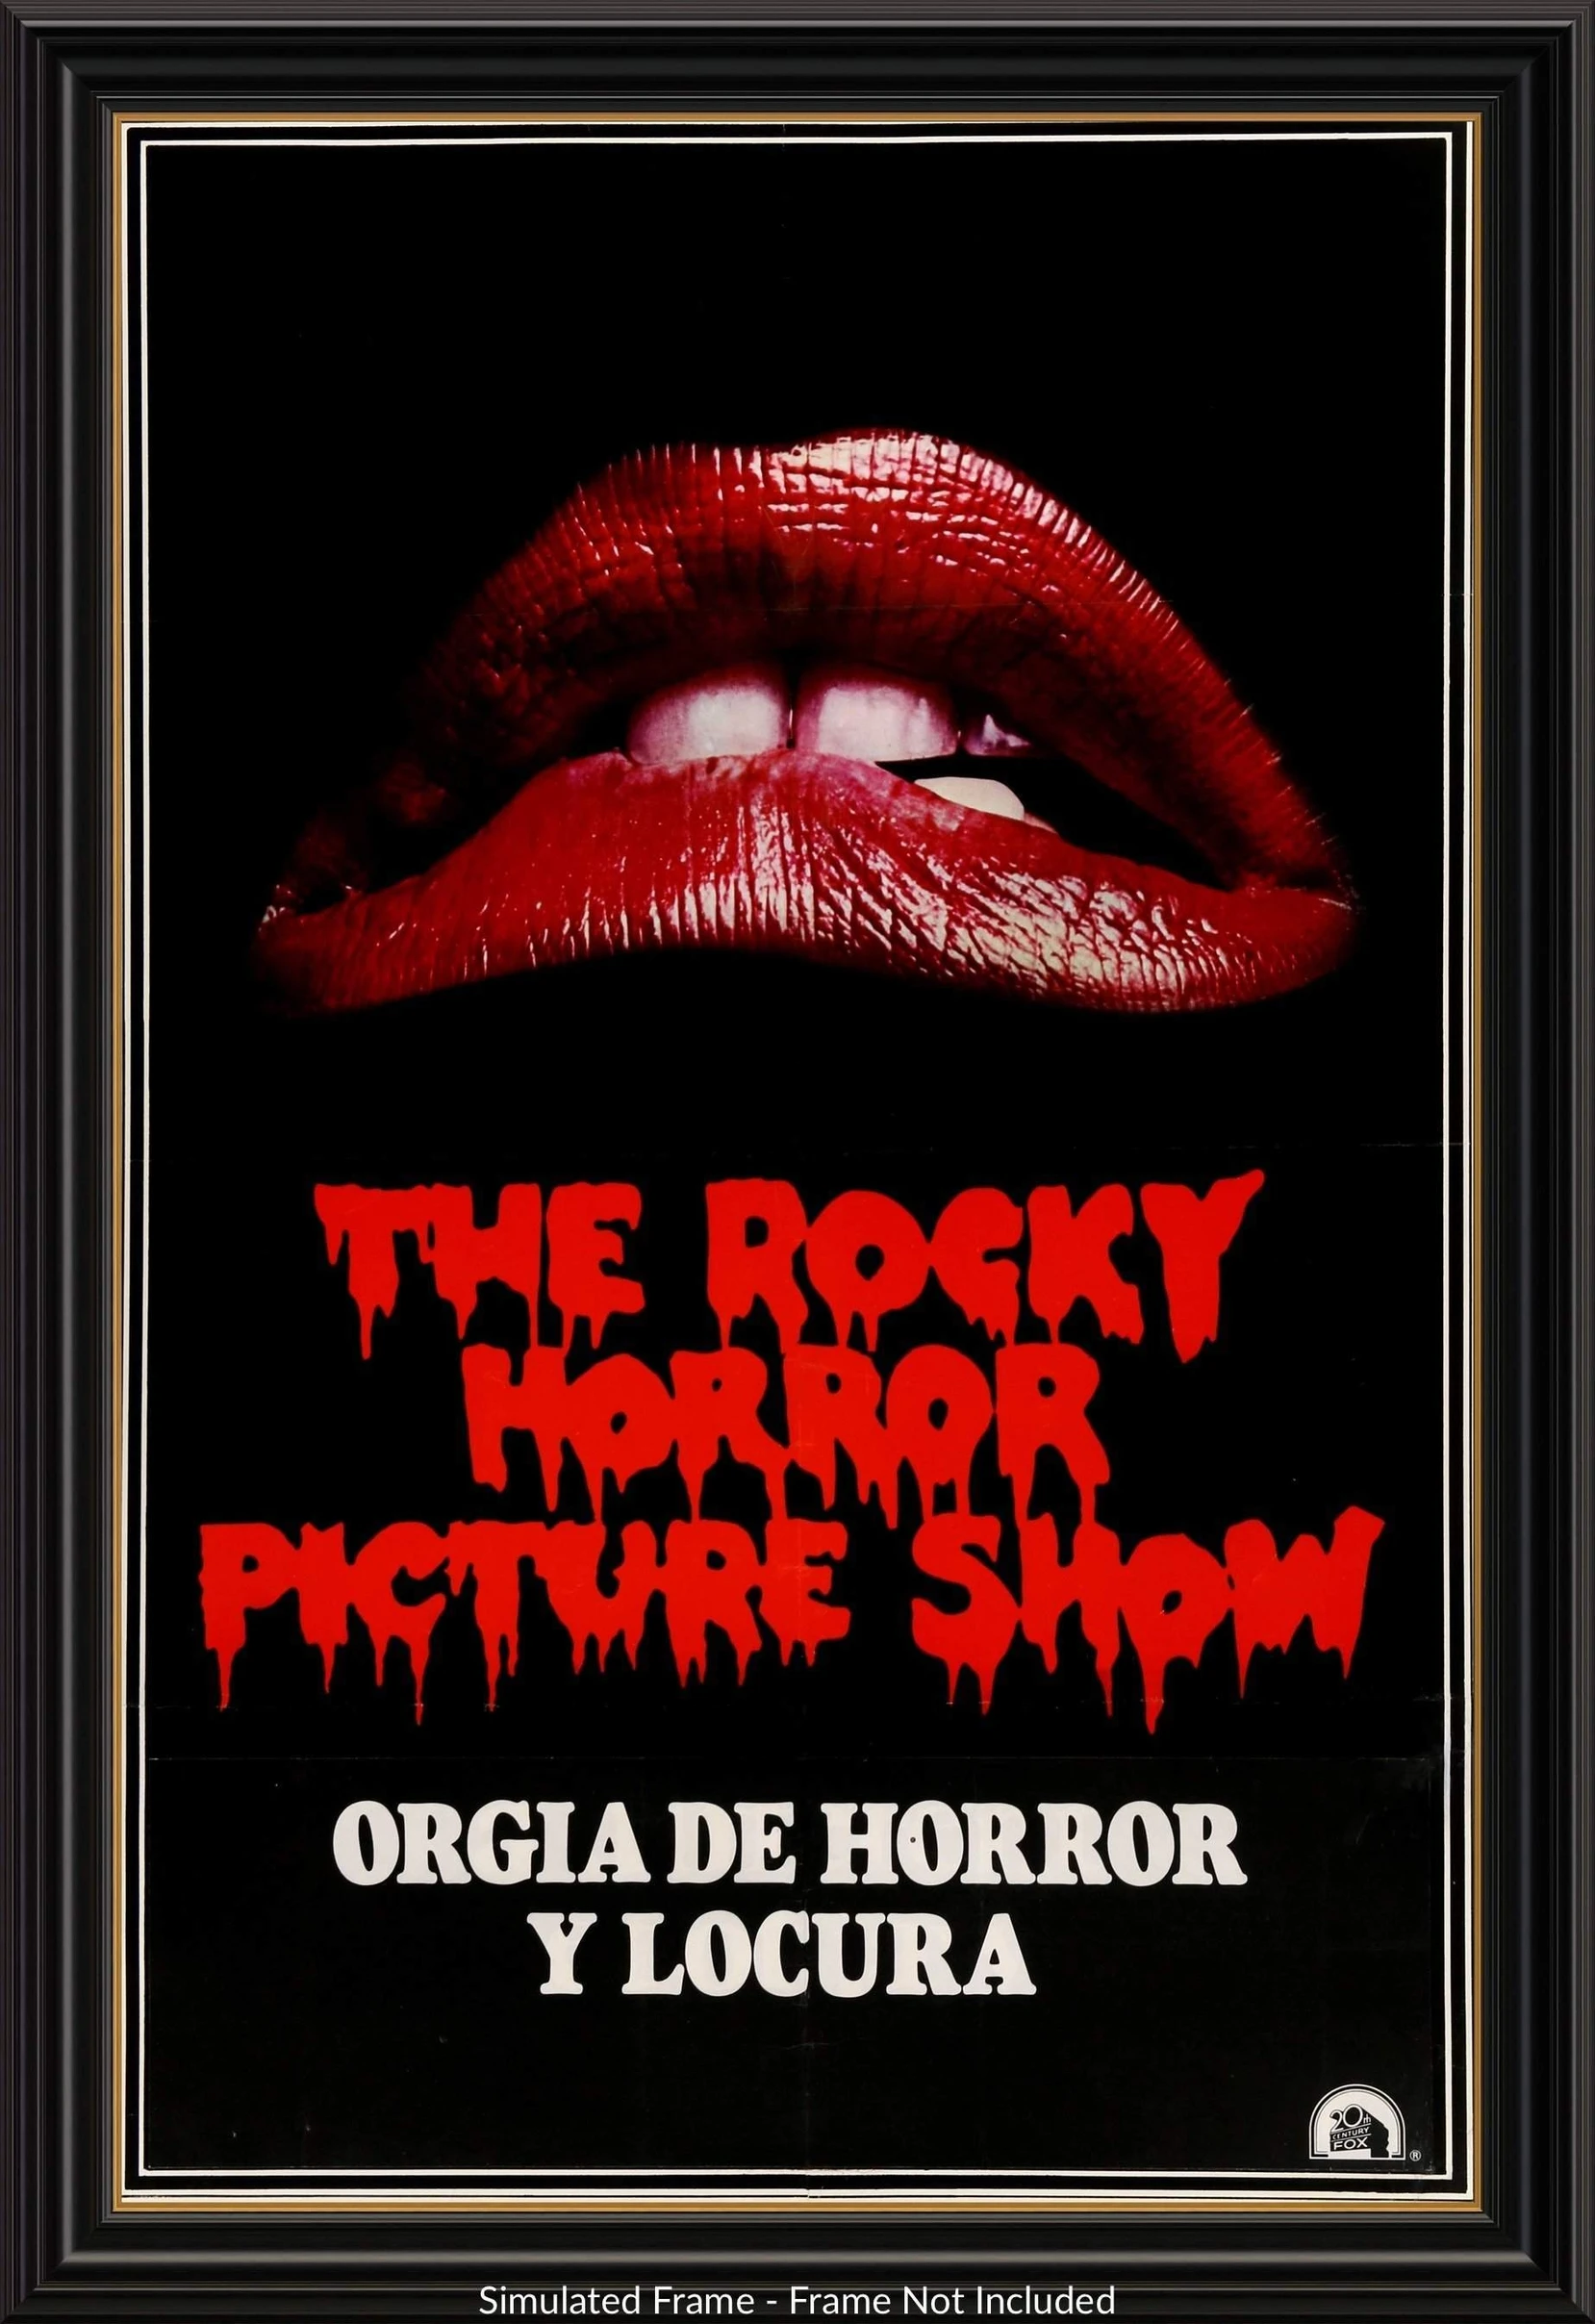 The Rocky Horror Picture Show Main Poster